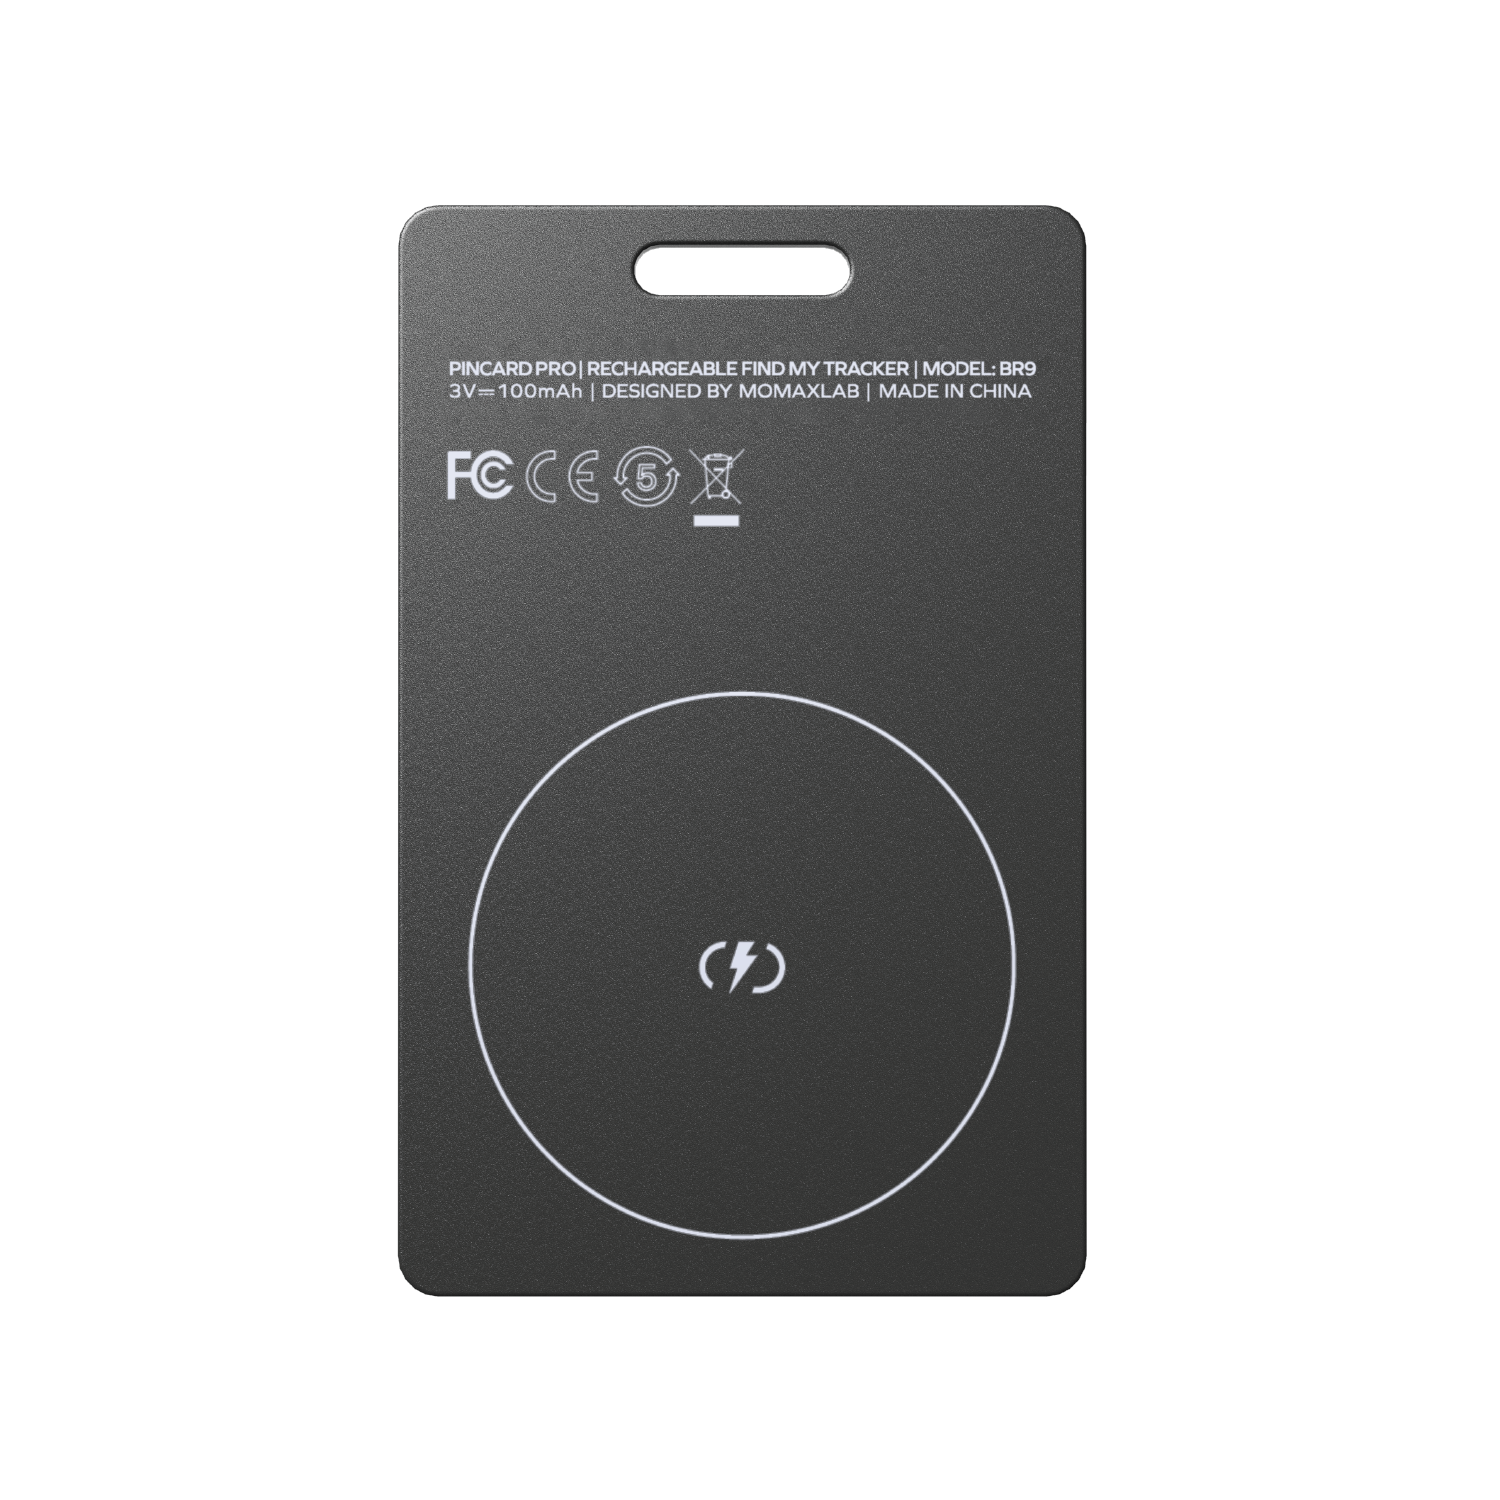 PinCard Pro - Rechargeable Find My Tracker